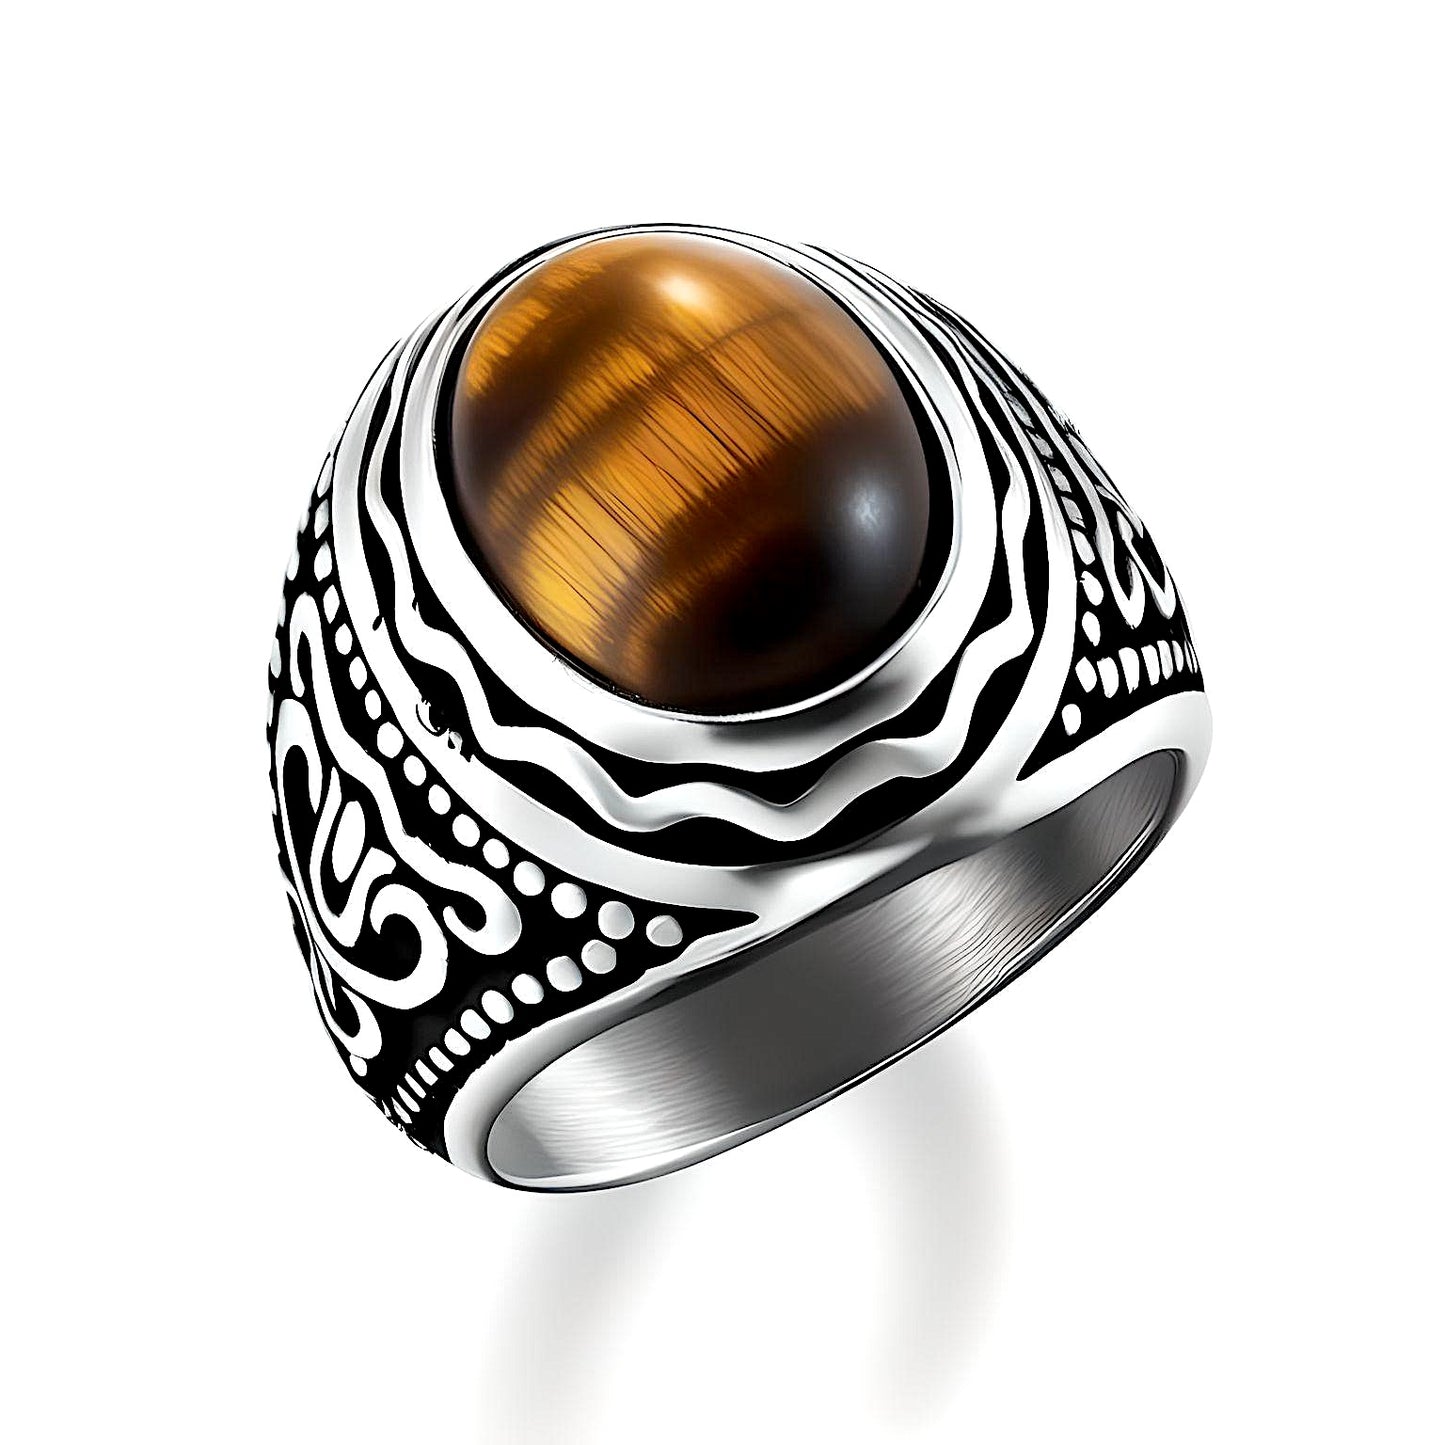 TIGER EYE BROWN - Vintage Tiger Eye Stone Rings for Men  | Pure Titanium Steel Ring Jewellery (Size - 17-21- 24)